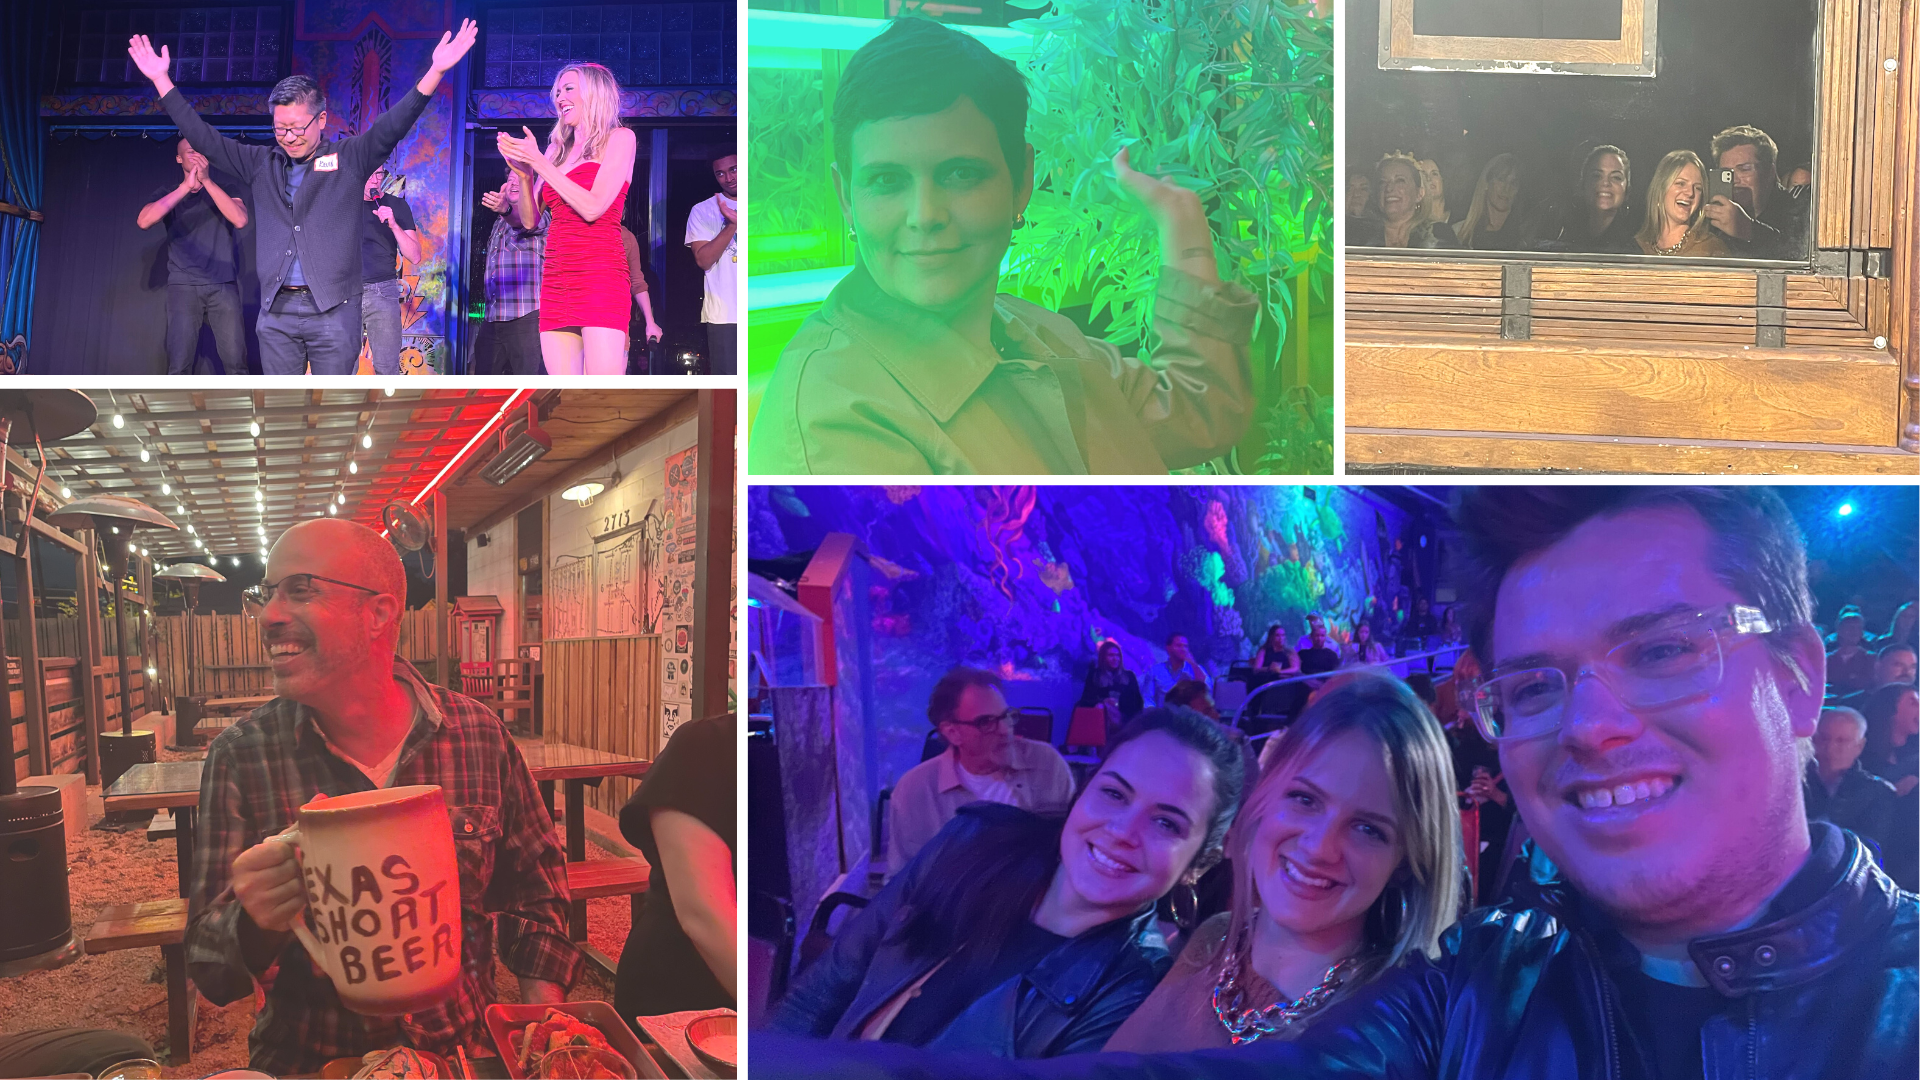 Pictures of our team at bars and shows in Austin, Texas on our retreat.